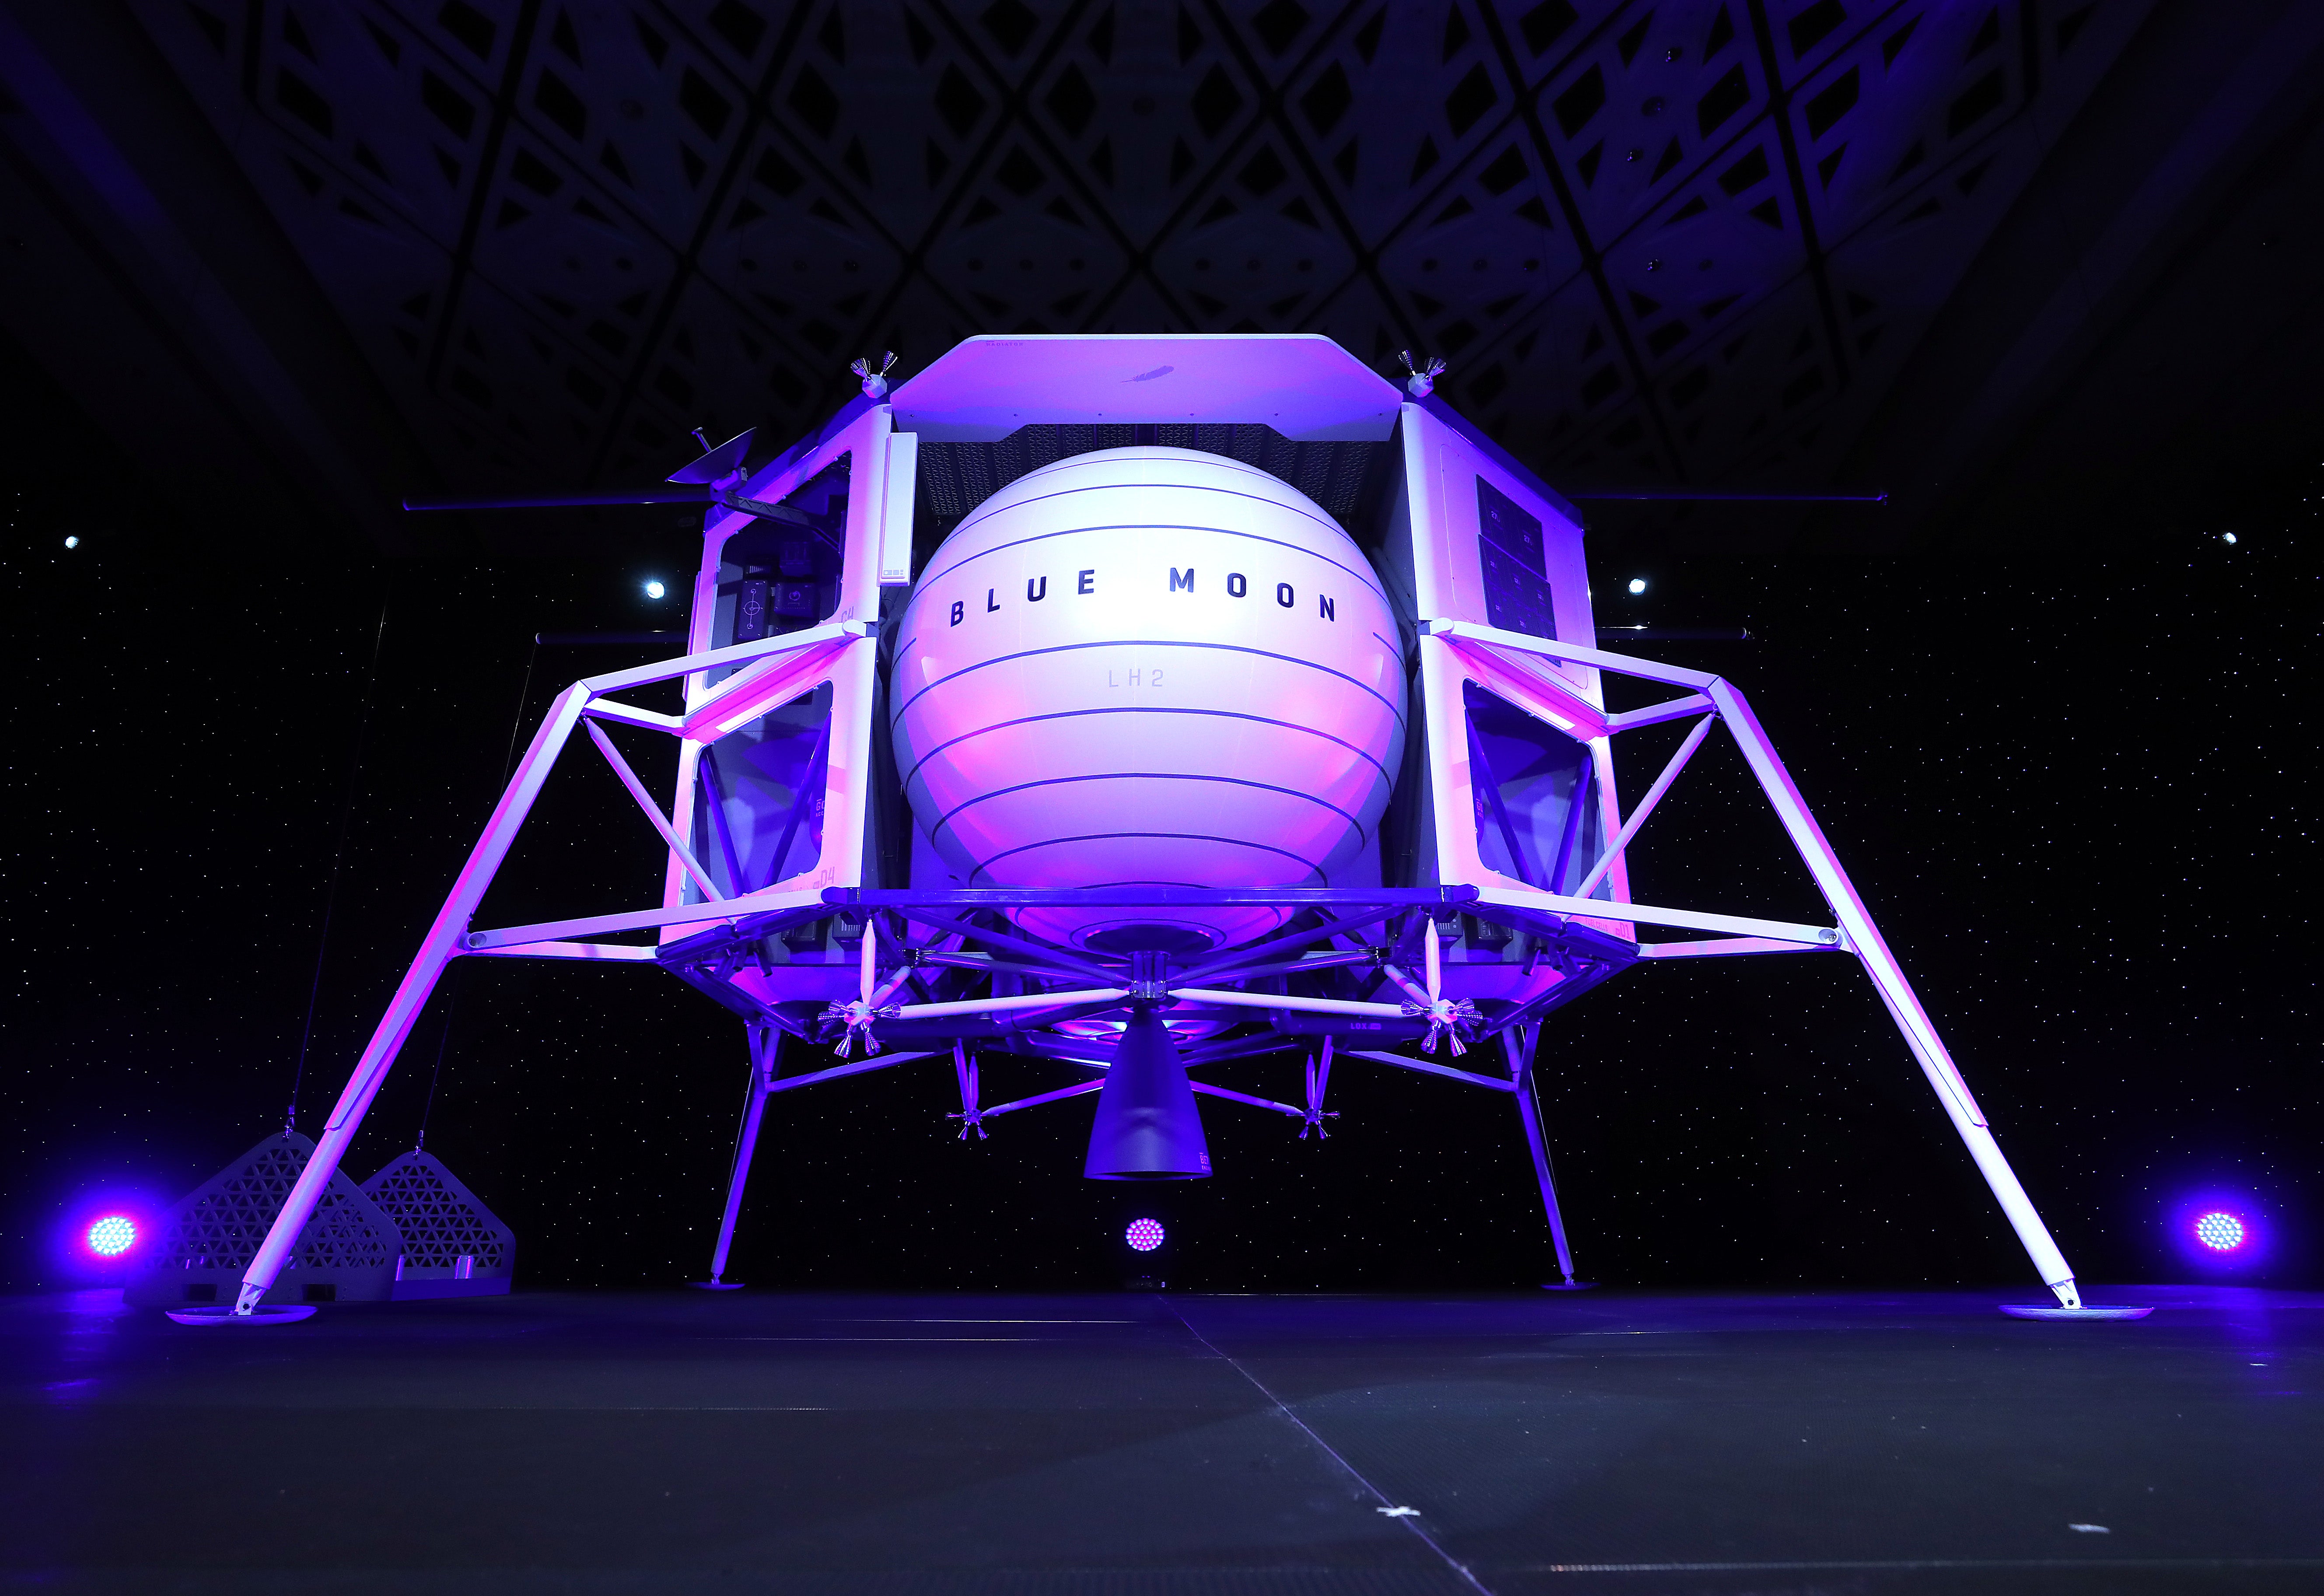 Blue Origin’s Blue Moon lunar lander prototype, which Nasa ultimately declined to select for the Artemis III Moon landing, choosing a spaceX design instead.